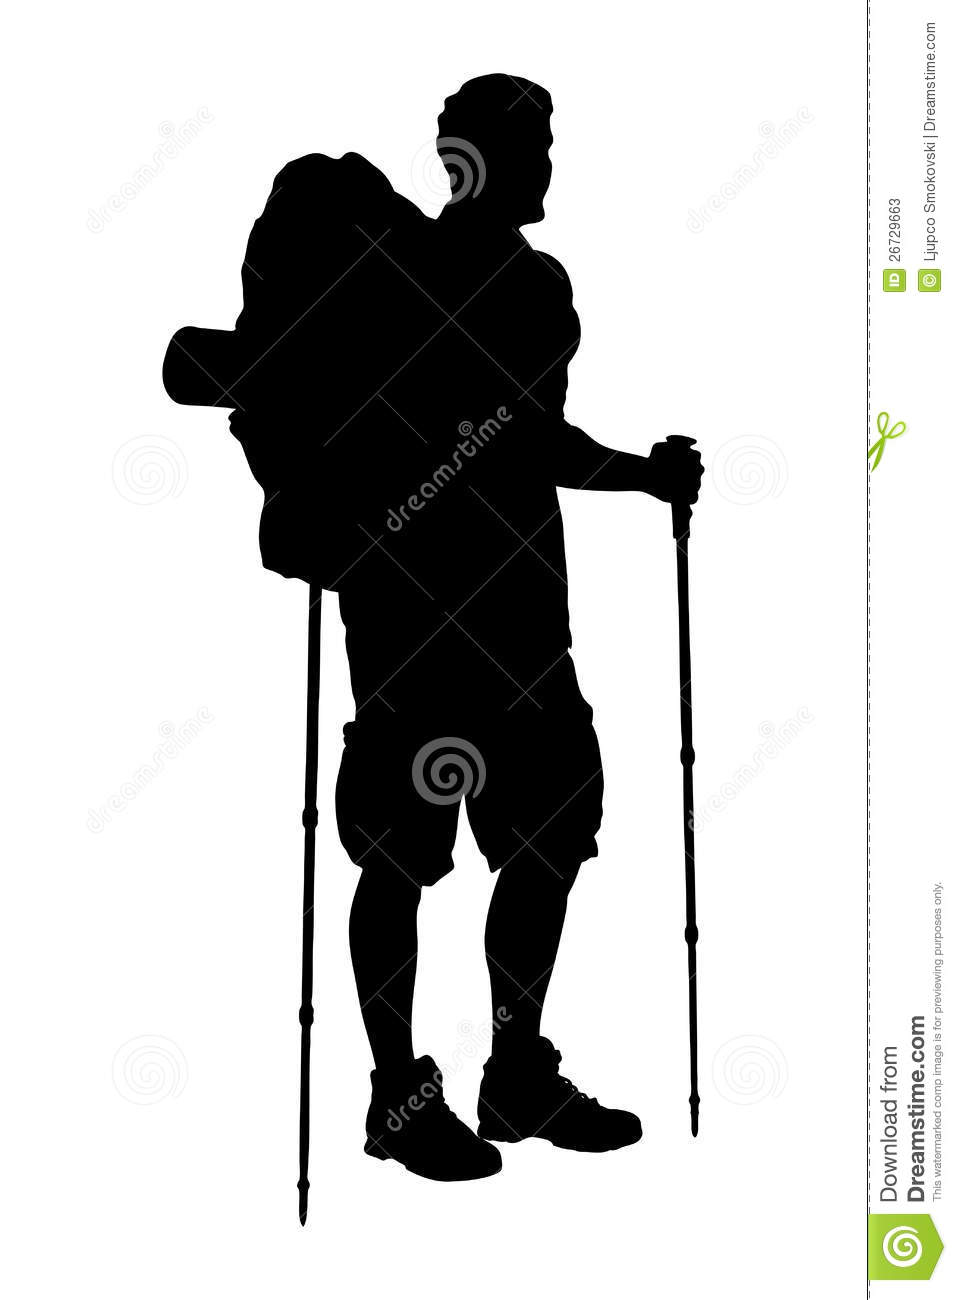 Silhouette Of A Hiker With Backpack Stock Photos   Image  26729663